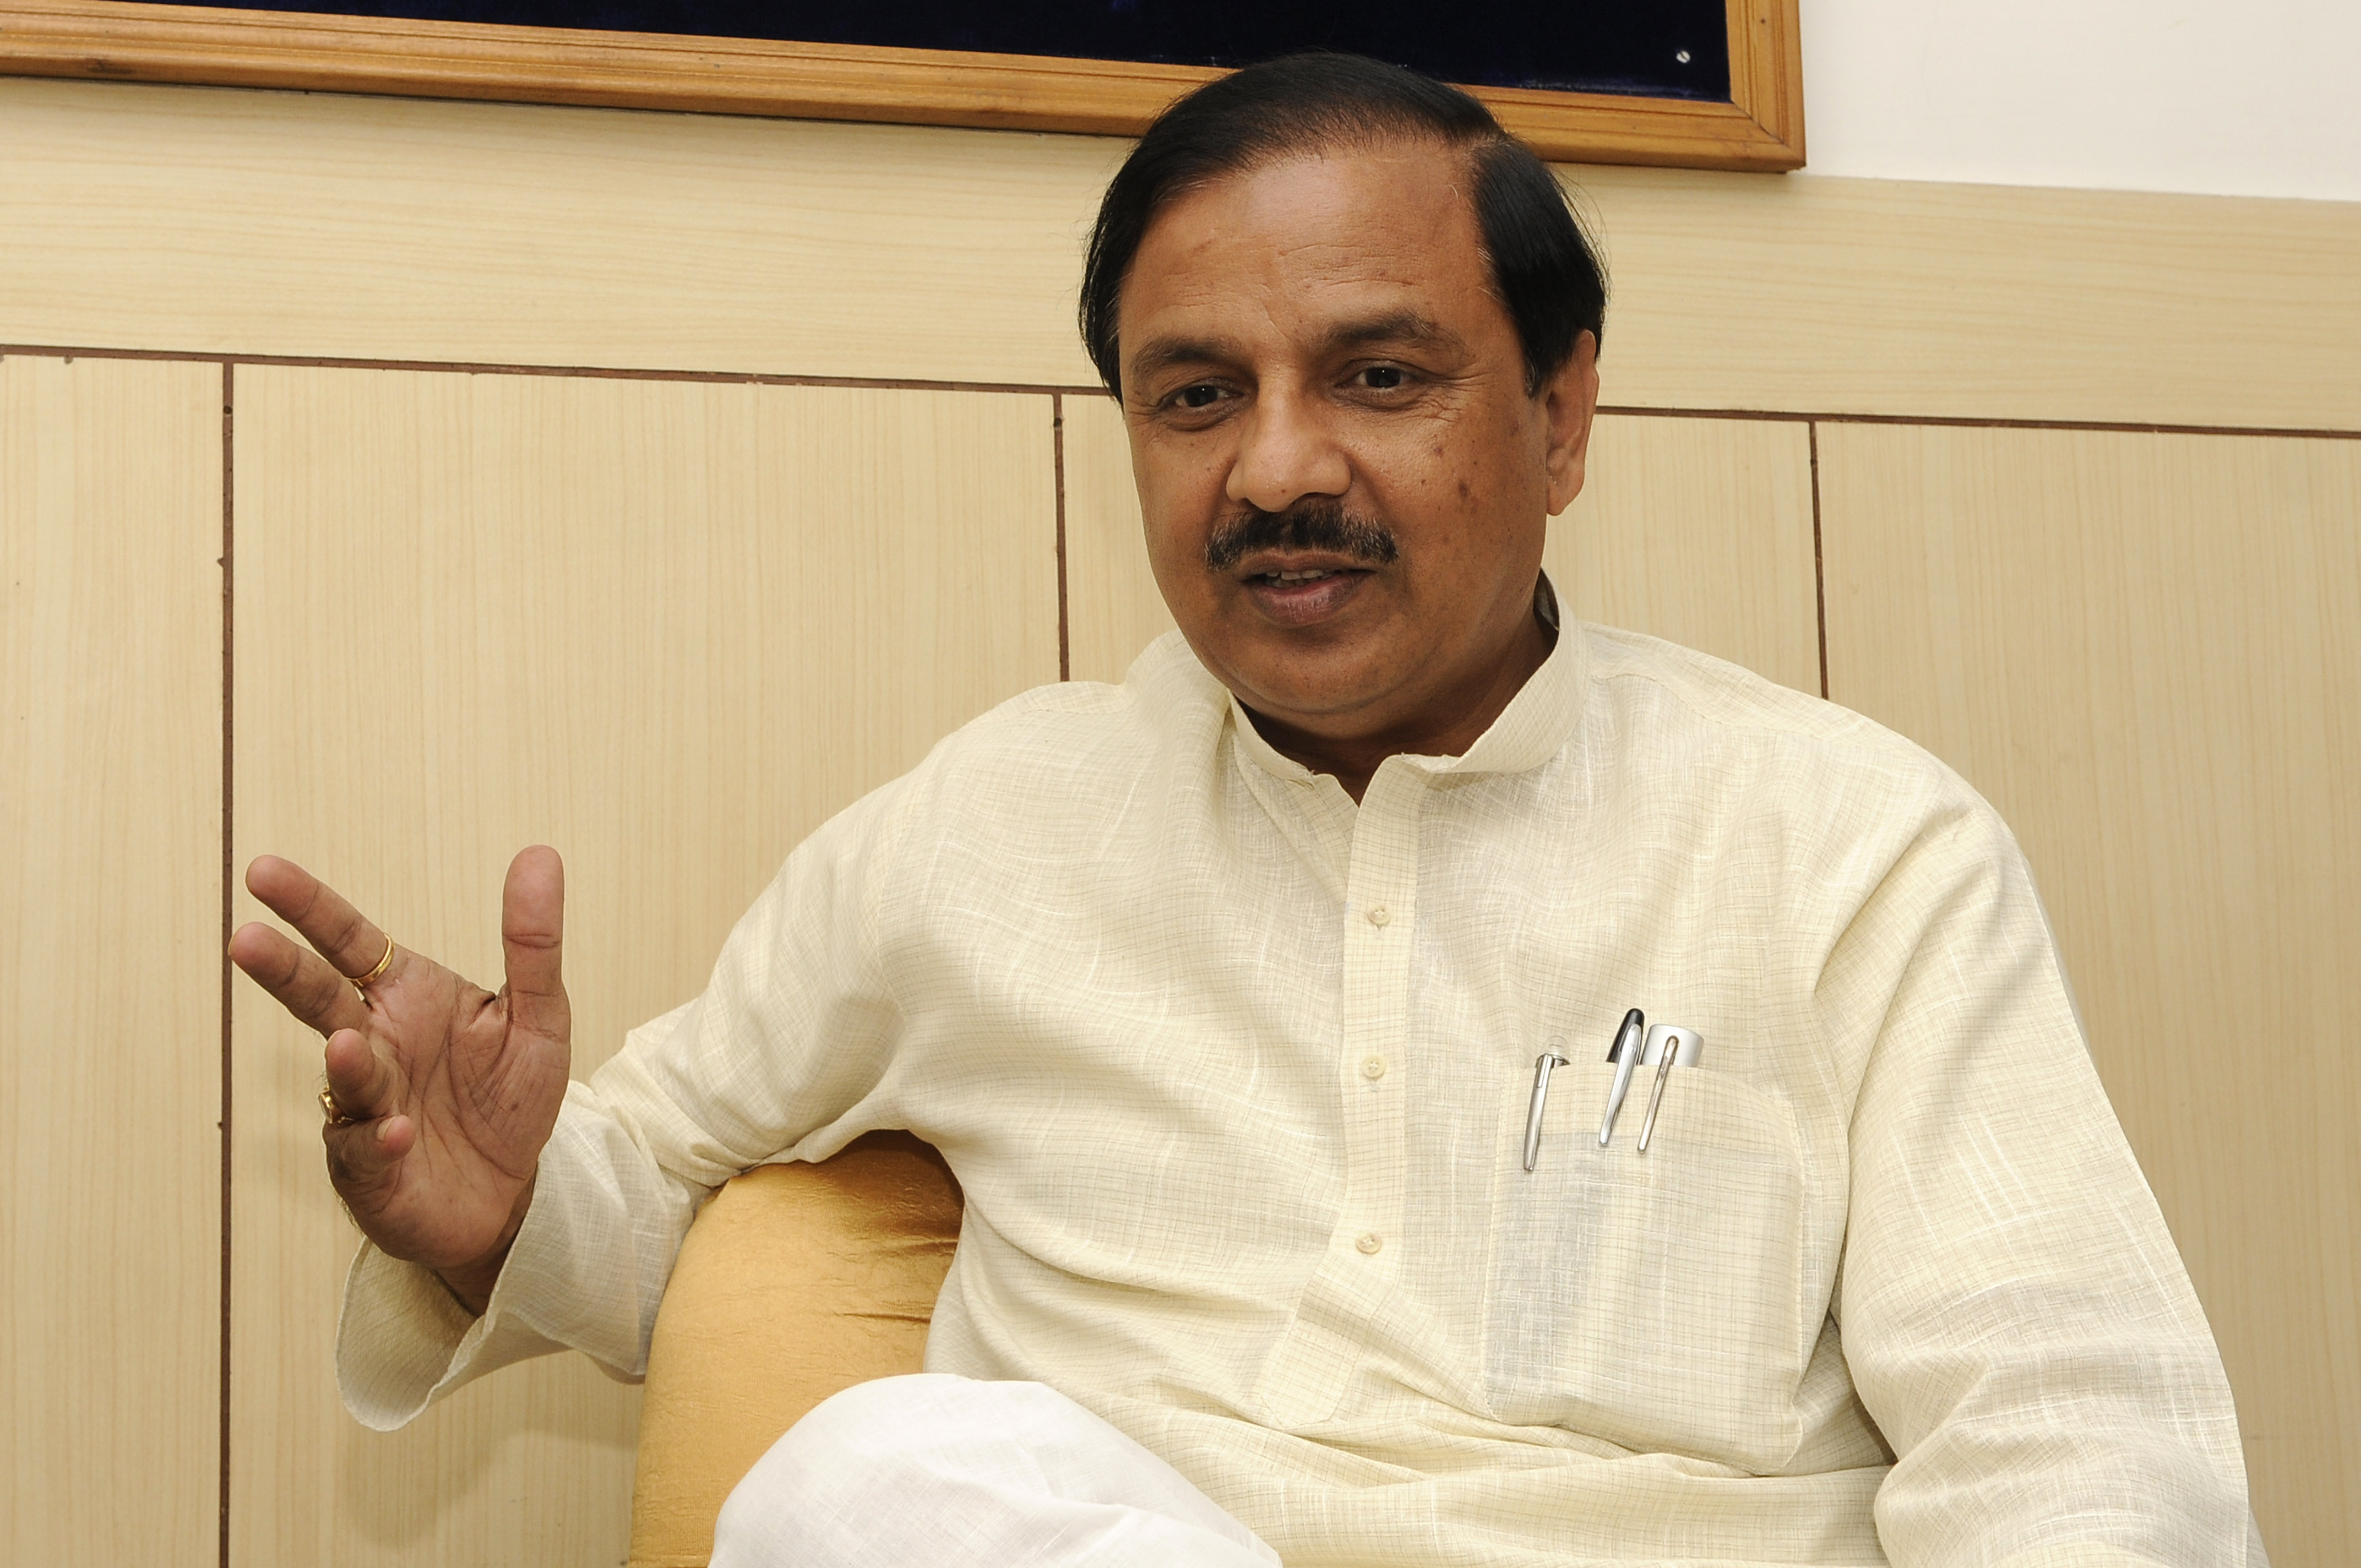 Indian Minister of State for Culture and Tourism Mahesh Sharma speaks during an interview at his office on Oct. 13, 2015, in Noida, India (Burhaan Kinu—Hindustan Times/Getty Images)